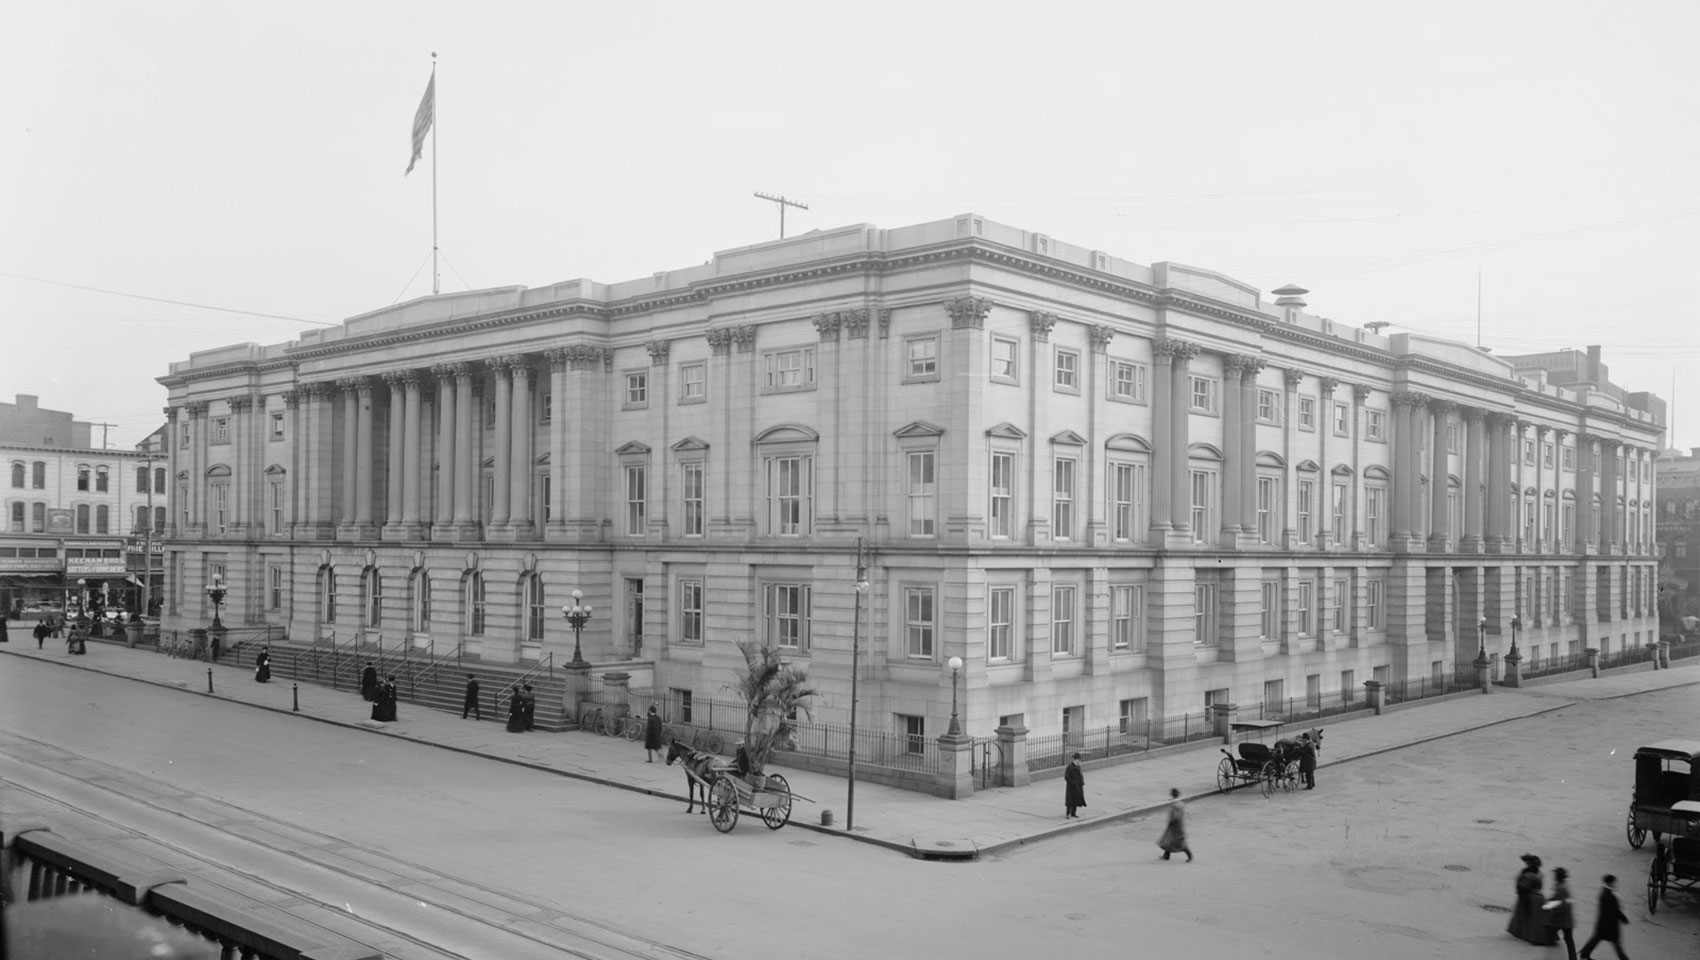 1905 photograph of Washington DC's General Post Office